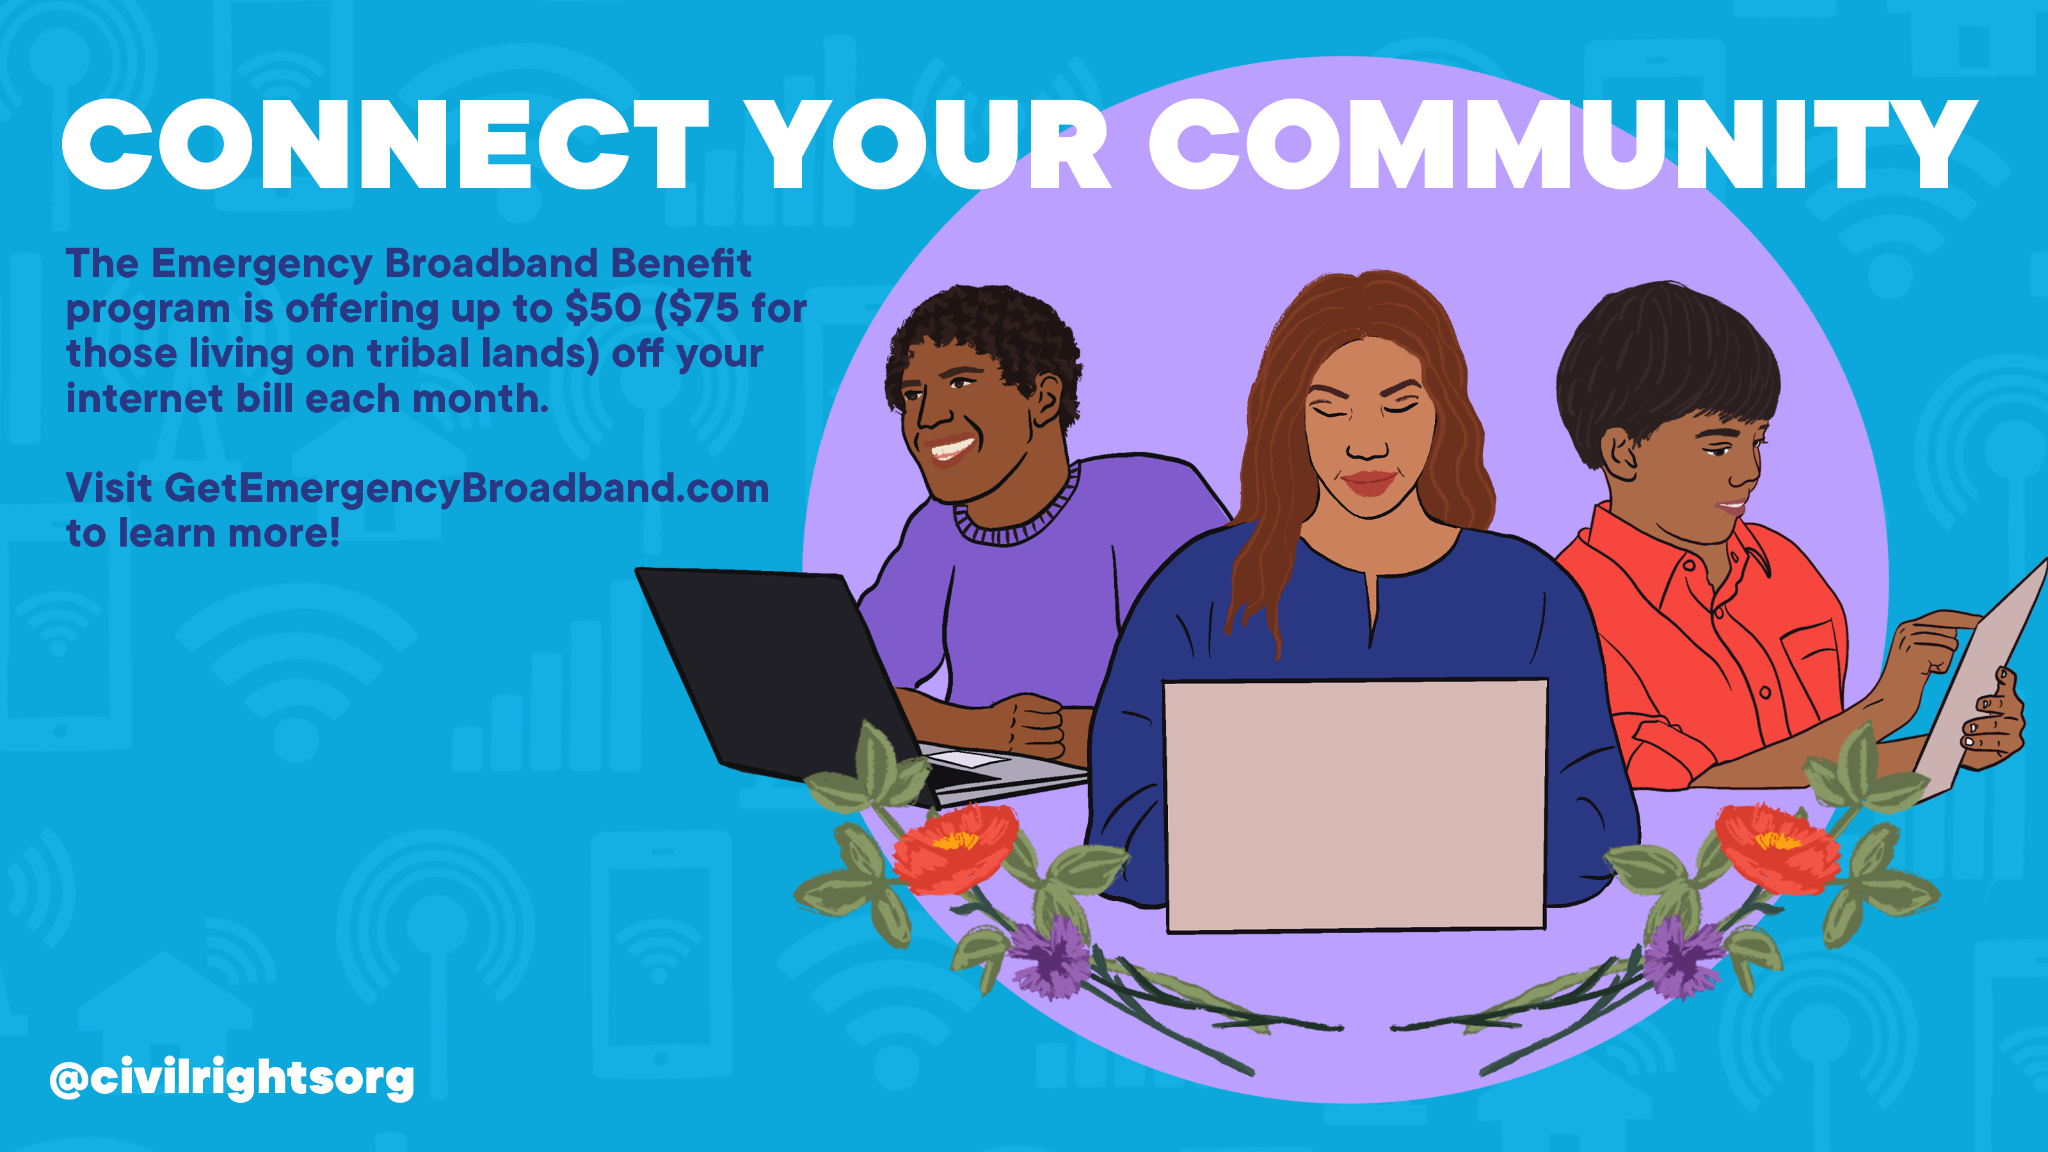 Illustration displaying three people accessing the internet on laptops and tablets, surrounded by a blue and purple background and floral imagery. The text reads: “Connect your community: The Emergency Broadband Benefit program is offering up $50 ($75 for those living on tribal lands) off your internet bill each month. Visit Get Emergency Broadband dot org to learn more!”